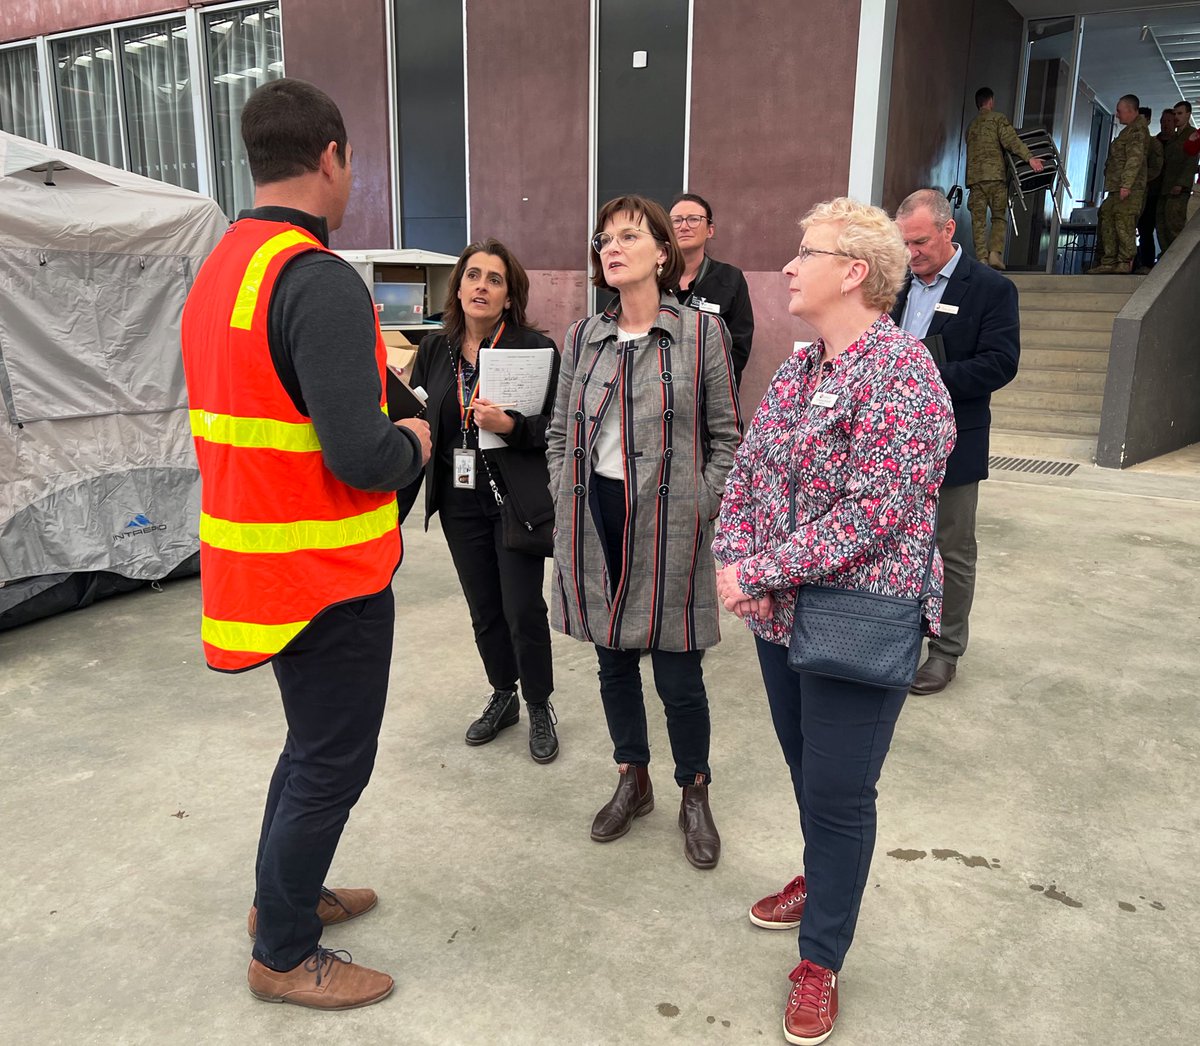 I’m proud of the work being done by Bendigo Council @VicGovDH and @VicGovDFFH staff to ensure the care and safety of those facing in to the devastation the #vicfloods have caused. Thank you for your compassion and your tireless work 🙏